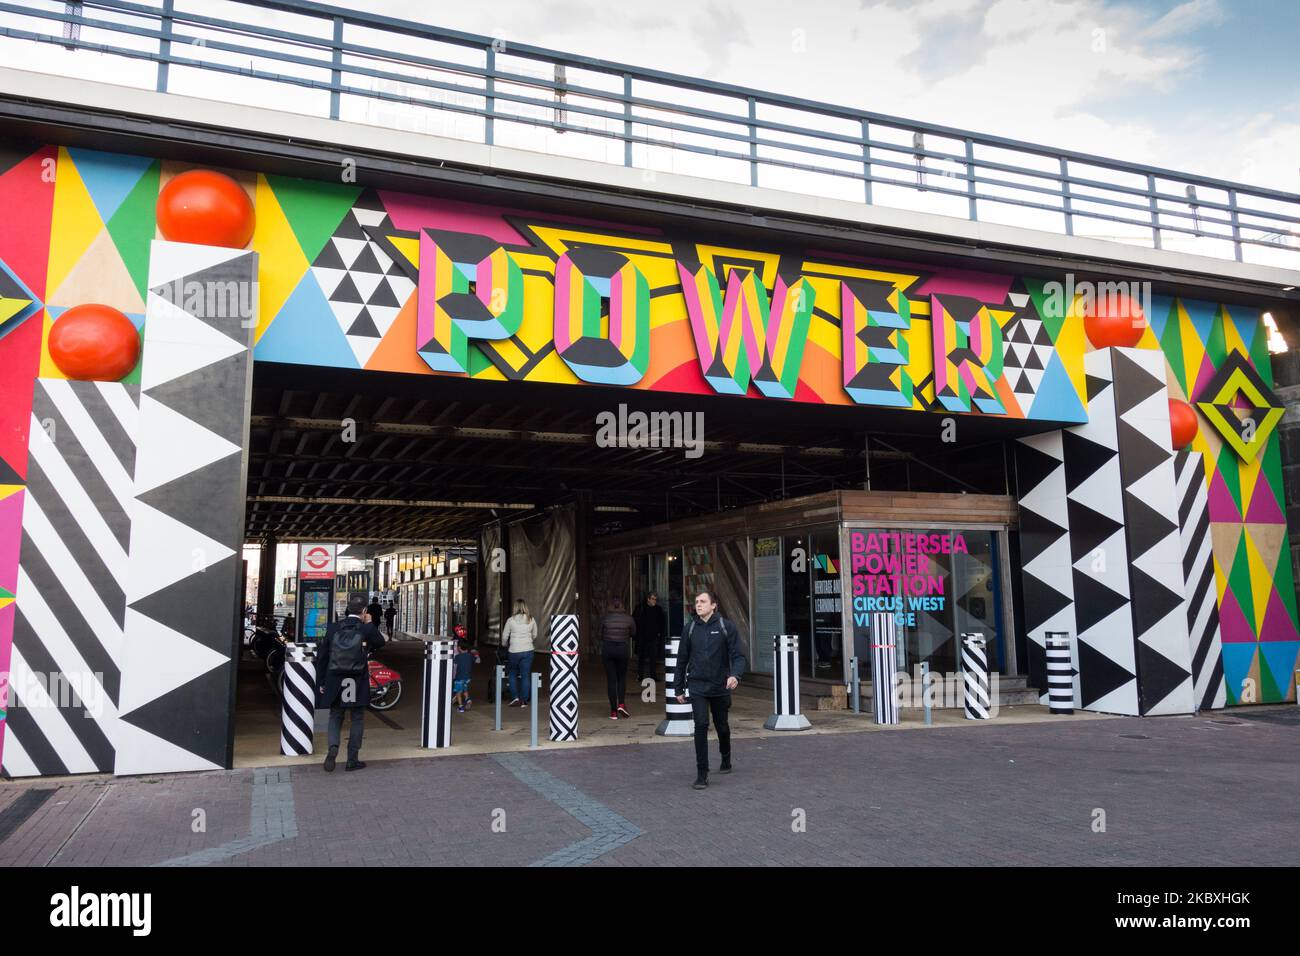 The colorful new Power Entrance to Circus West Village at Battersea ...